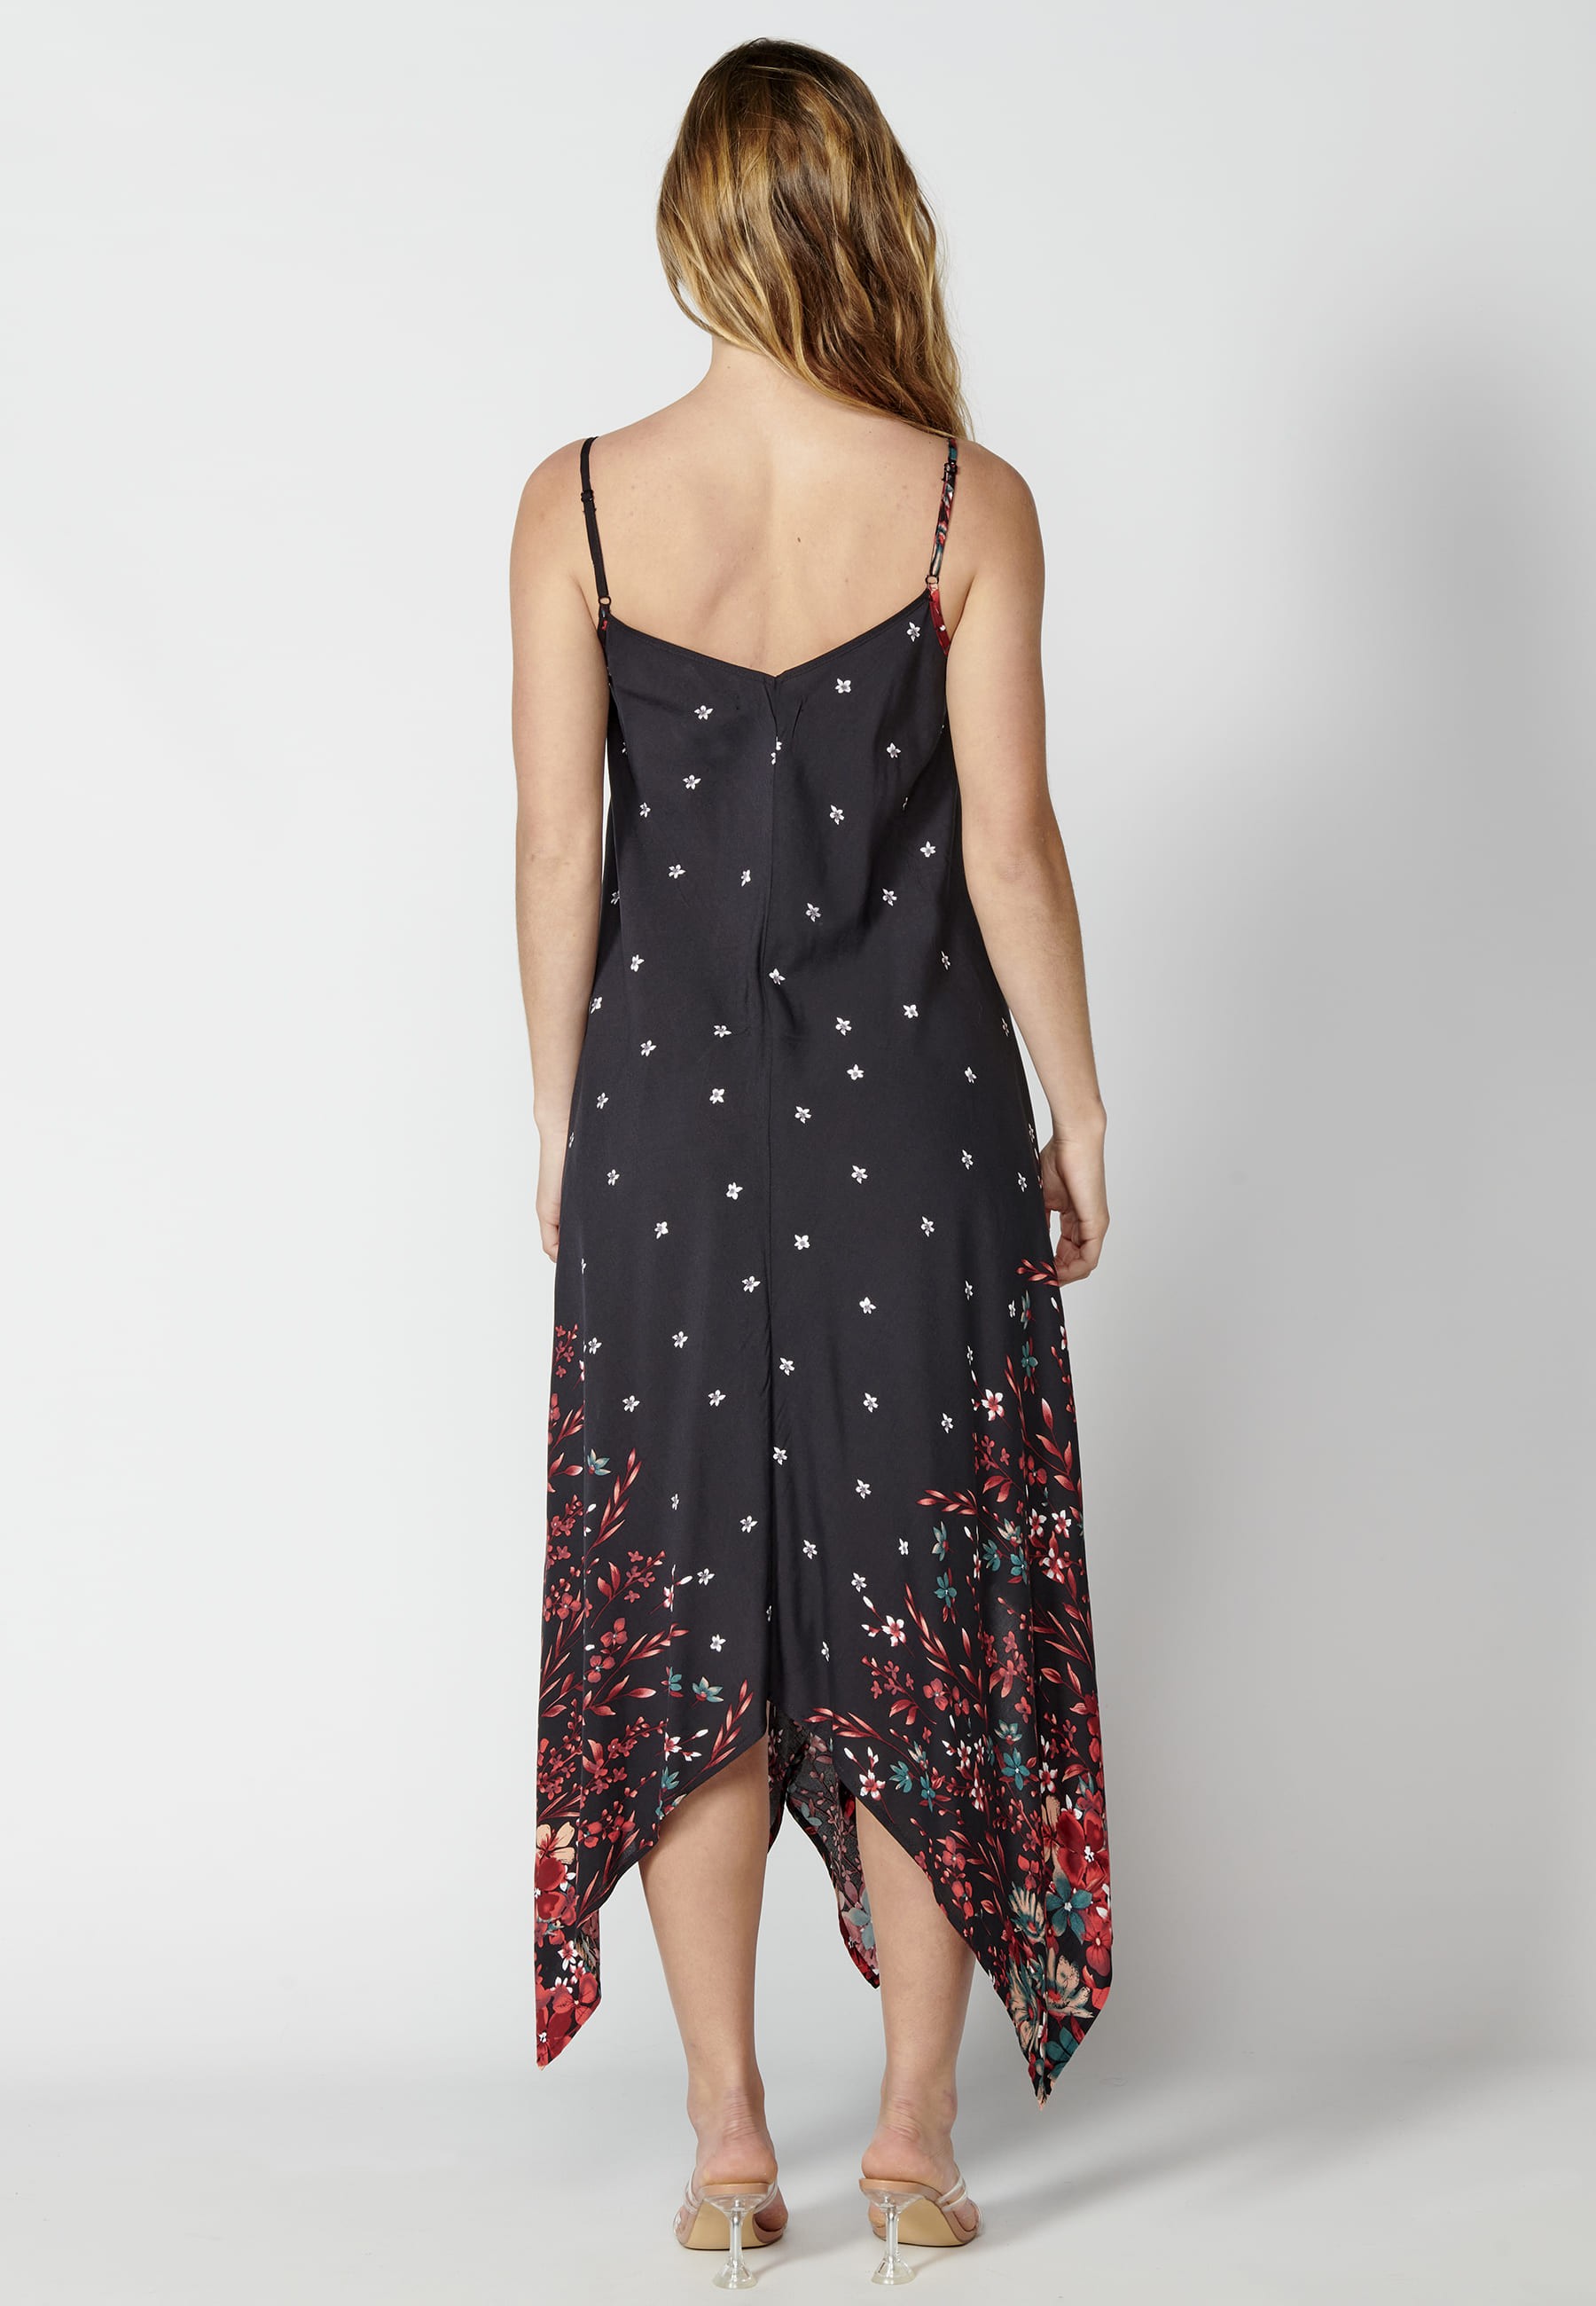 Loose long strappy dress with black floral print for Women